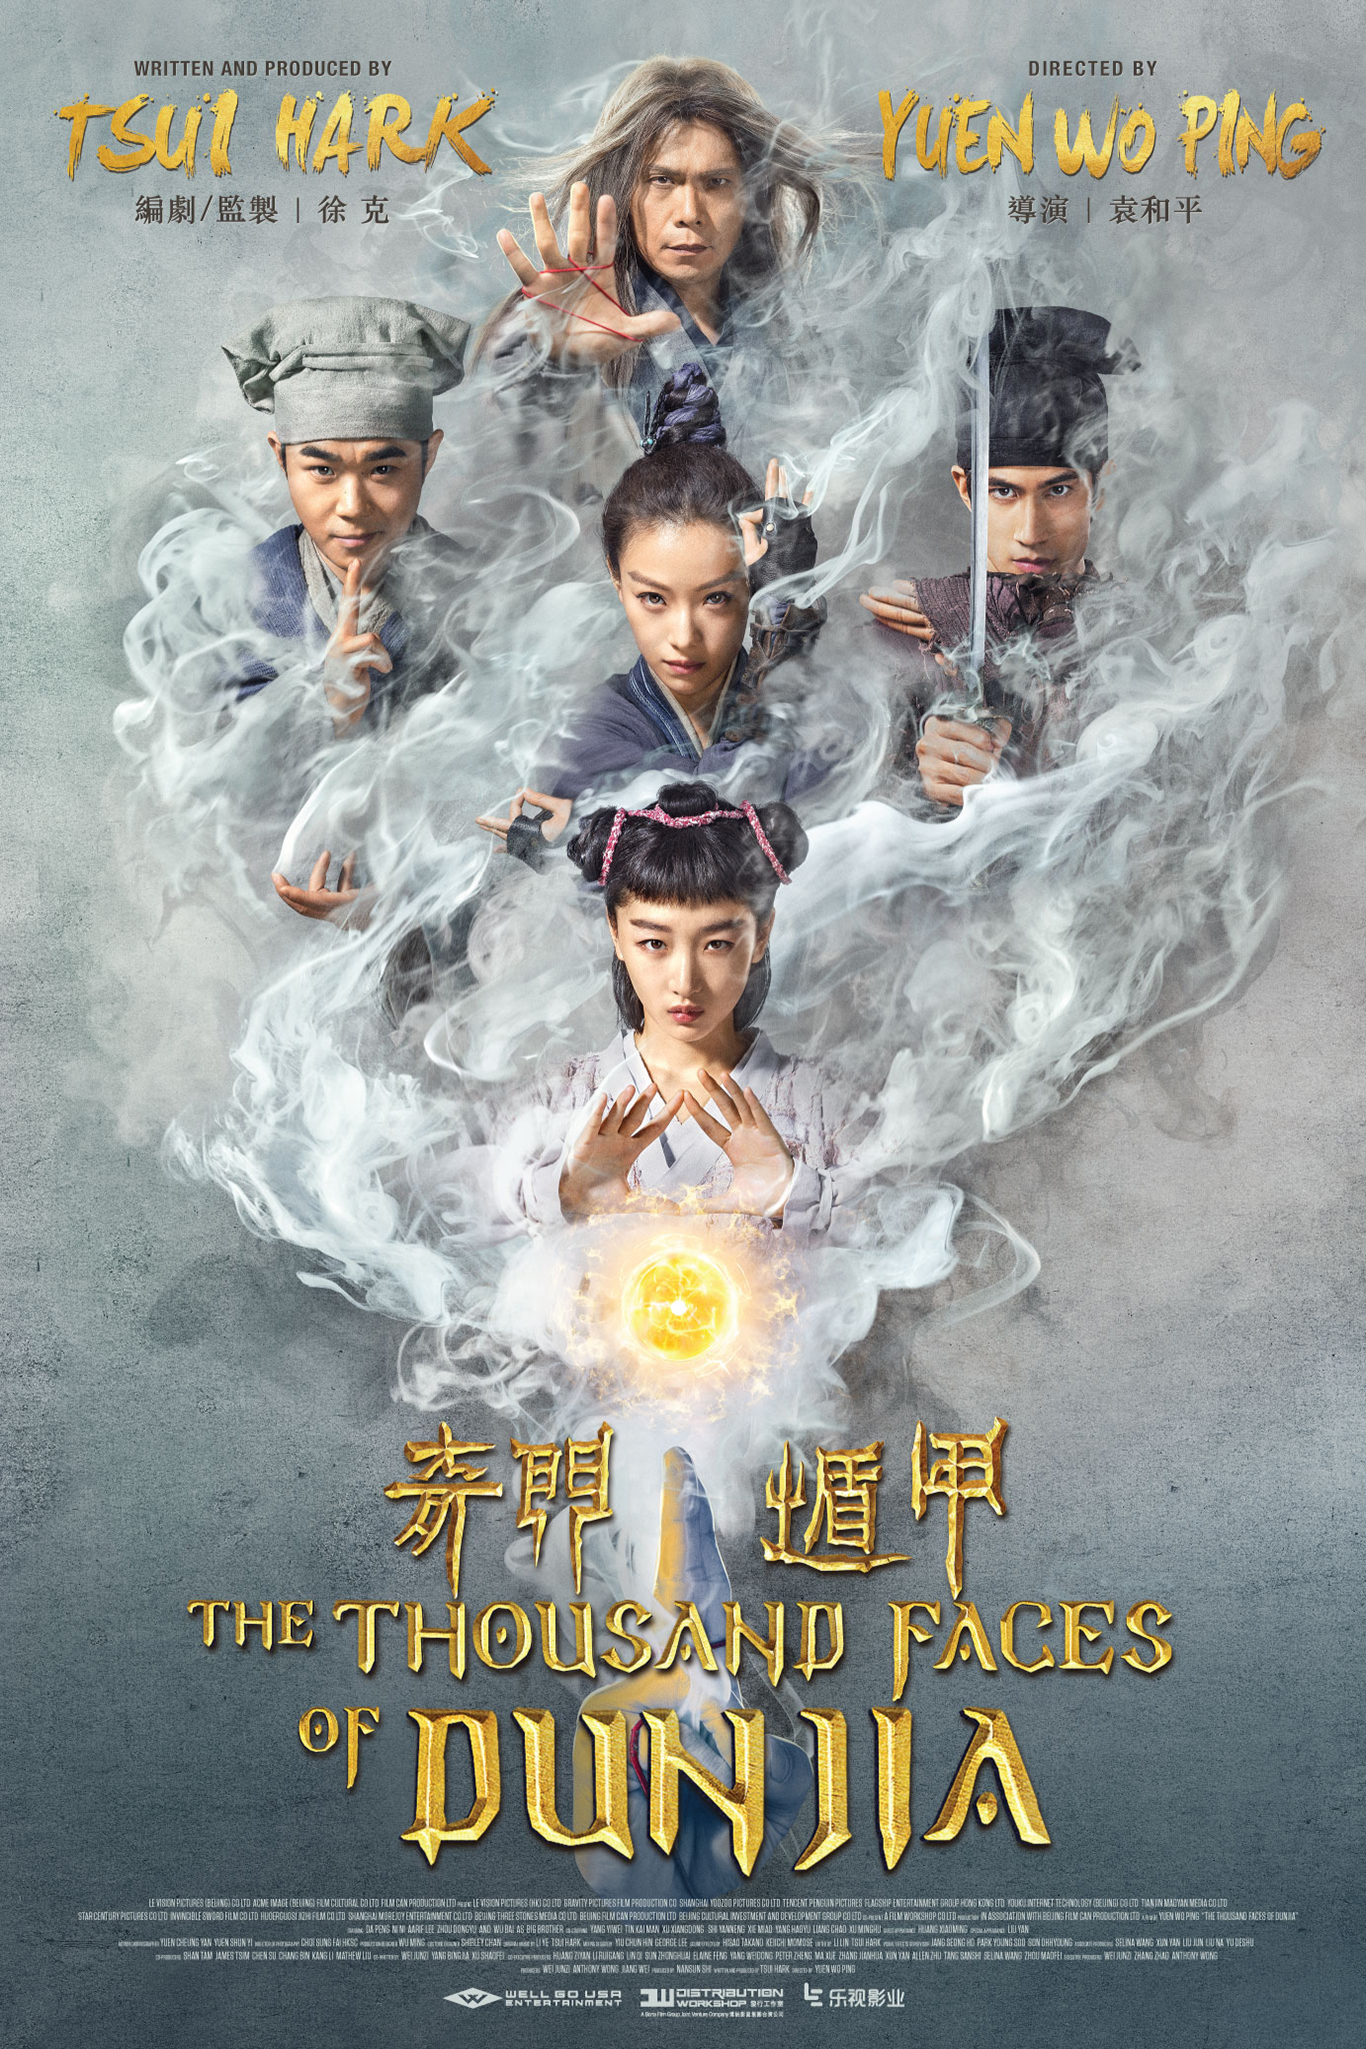 The Thousand Faces of Dunjia (2017) 1080p BluRay Hindi ORG Dual Audio Movie ESubs [2.5GB]